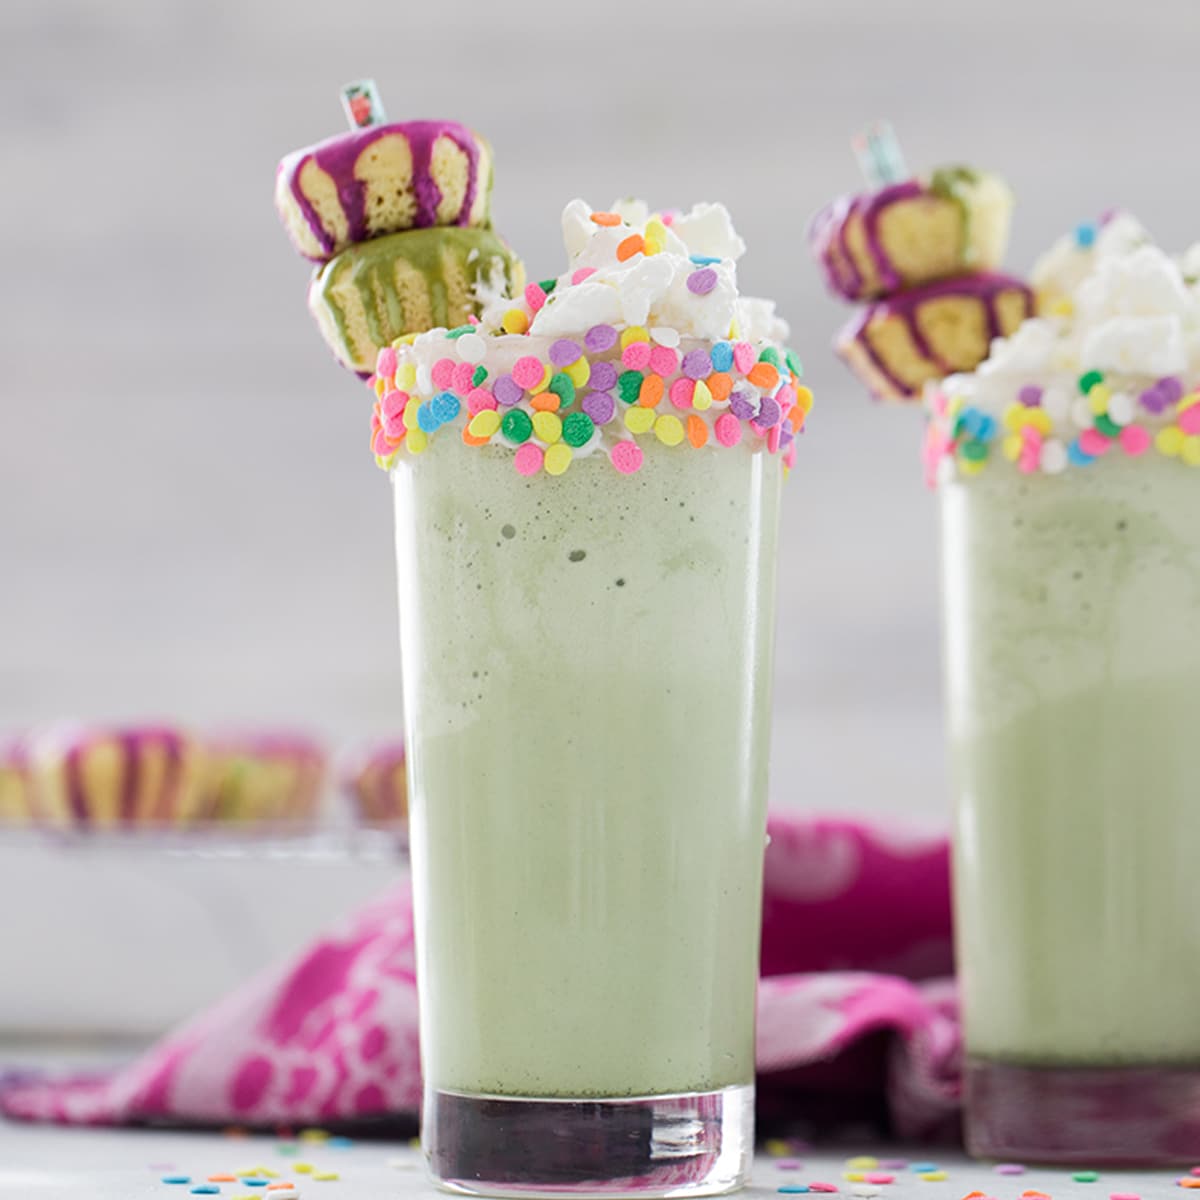 Head-on view of two matcha milkshakes with sprinkles and mini donuts.